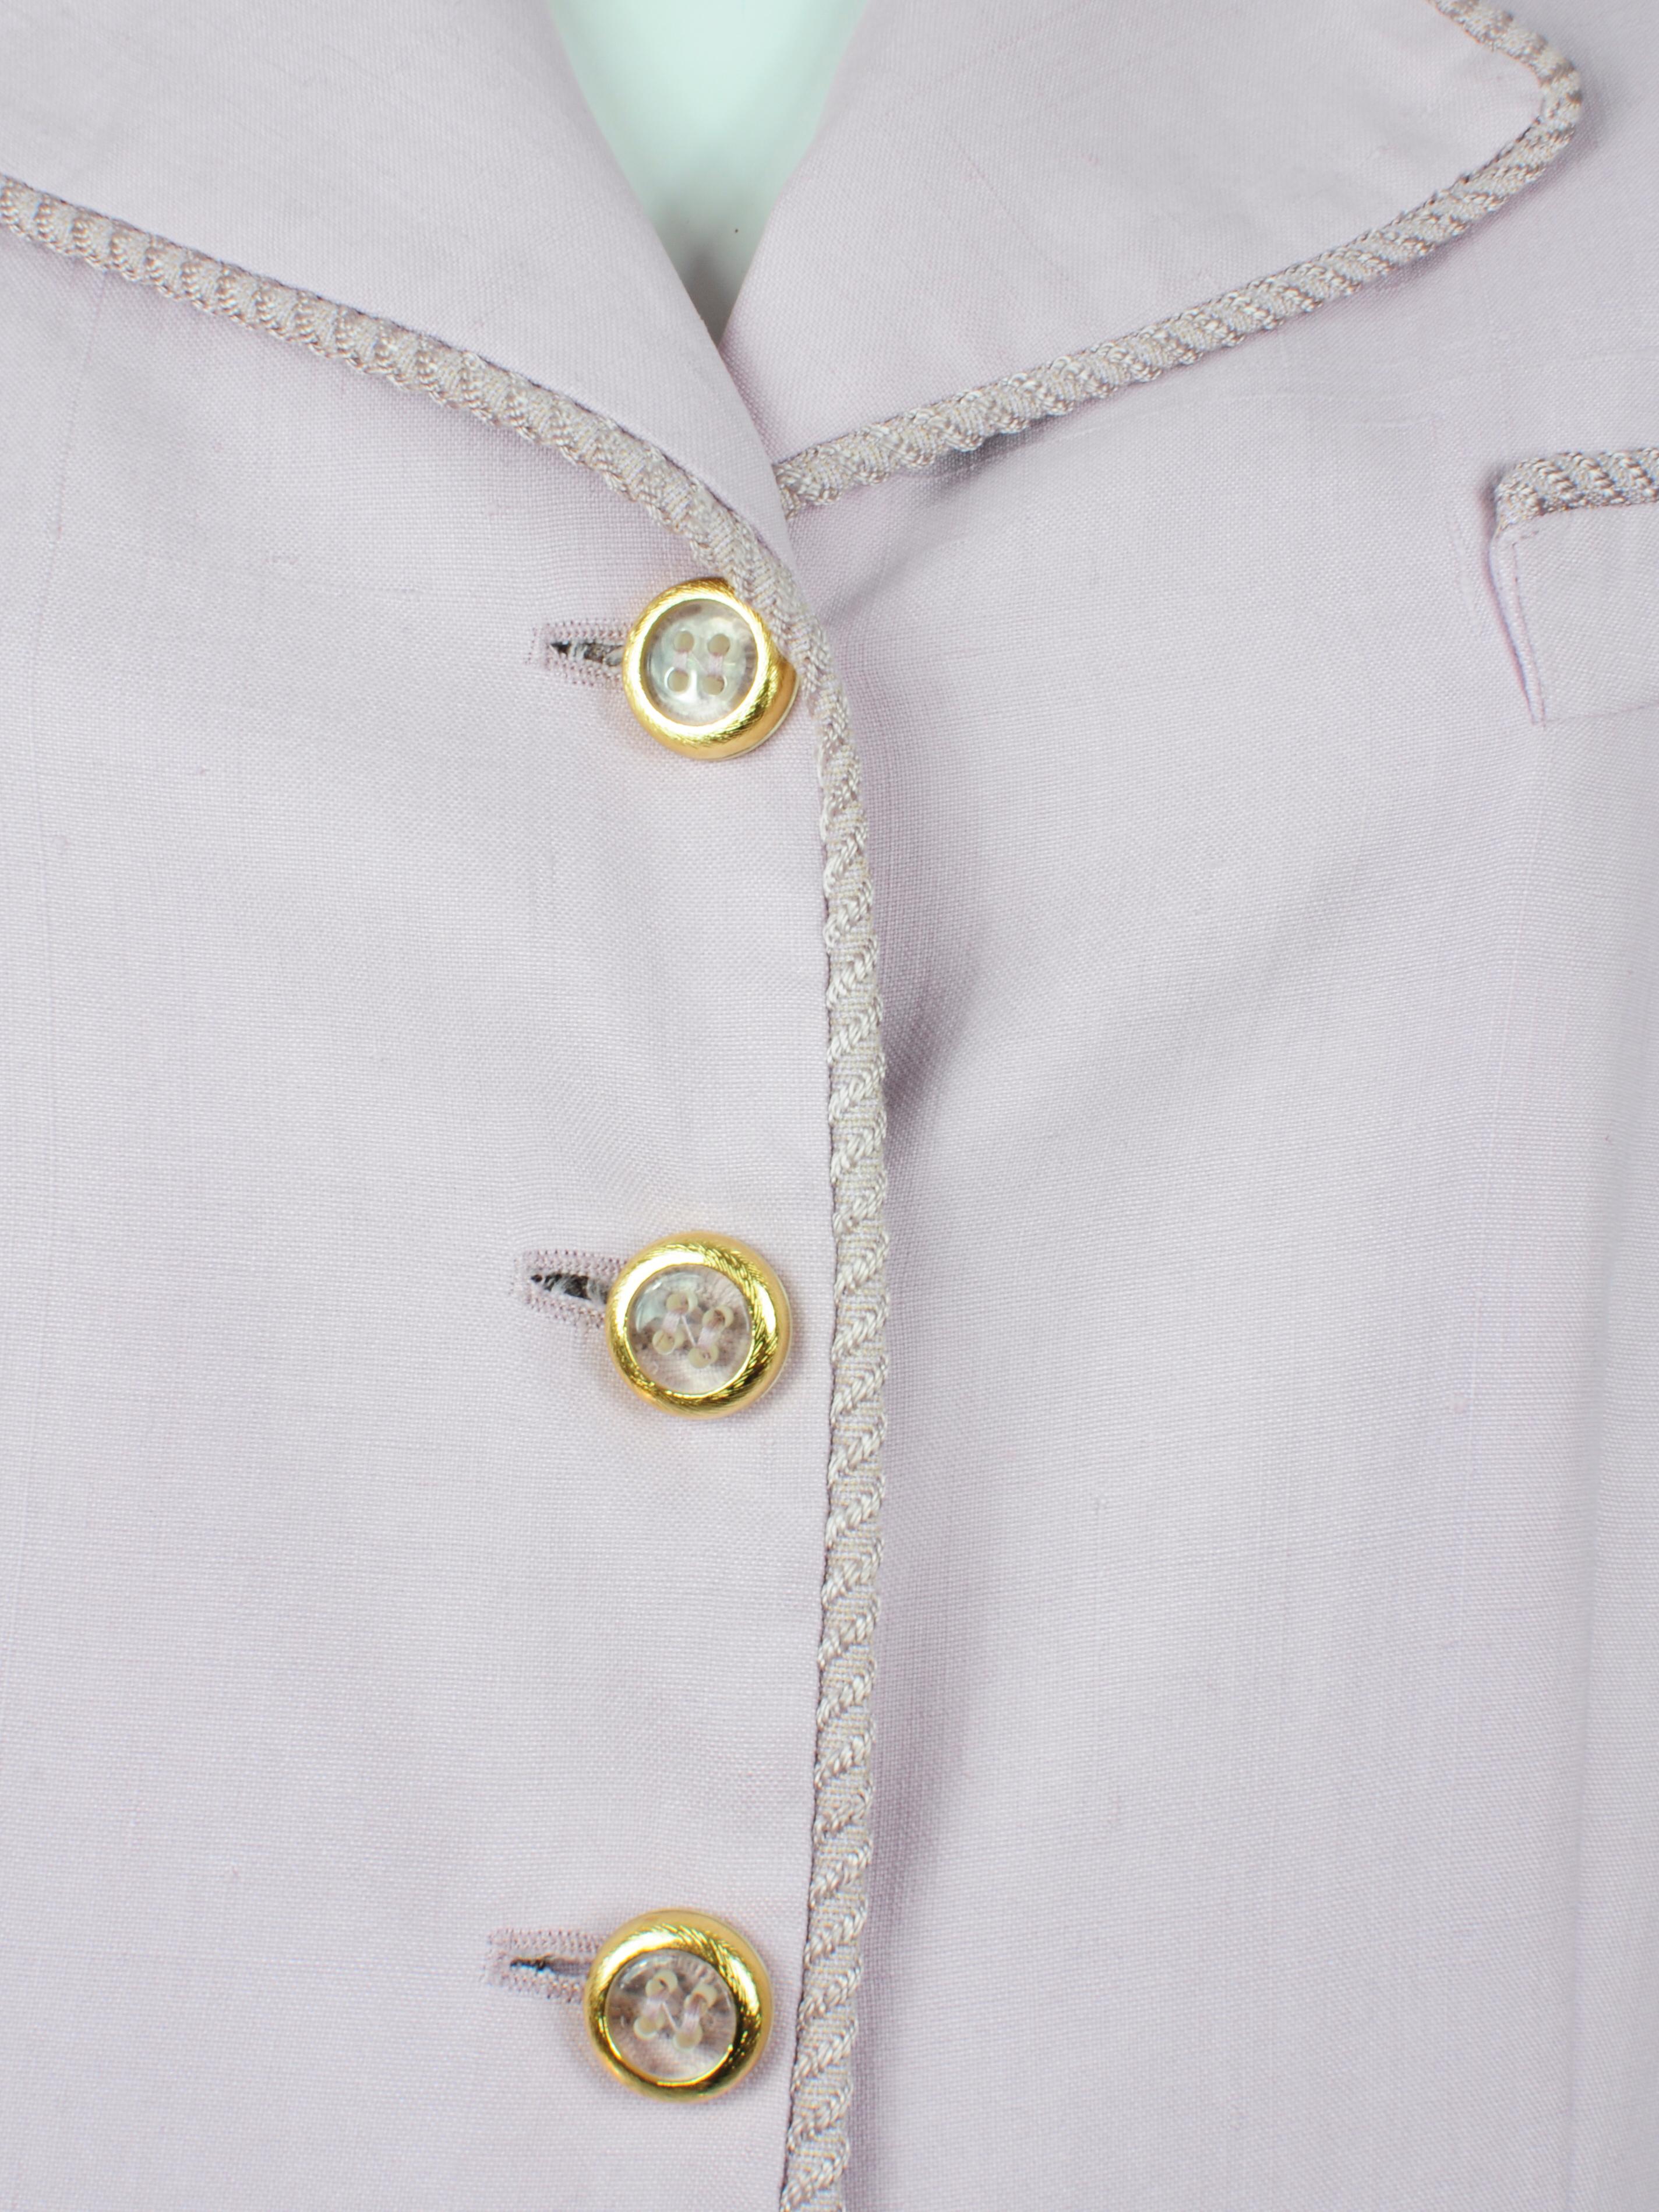 Valentino Miss V Silk Lilac Blazer Jacket with Golden Buttons 1990s  5